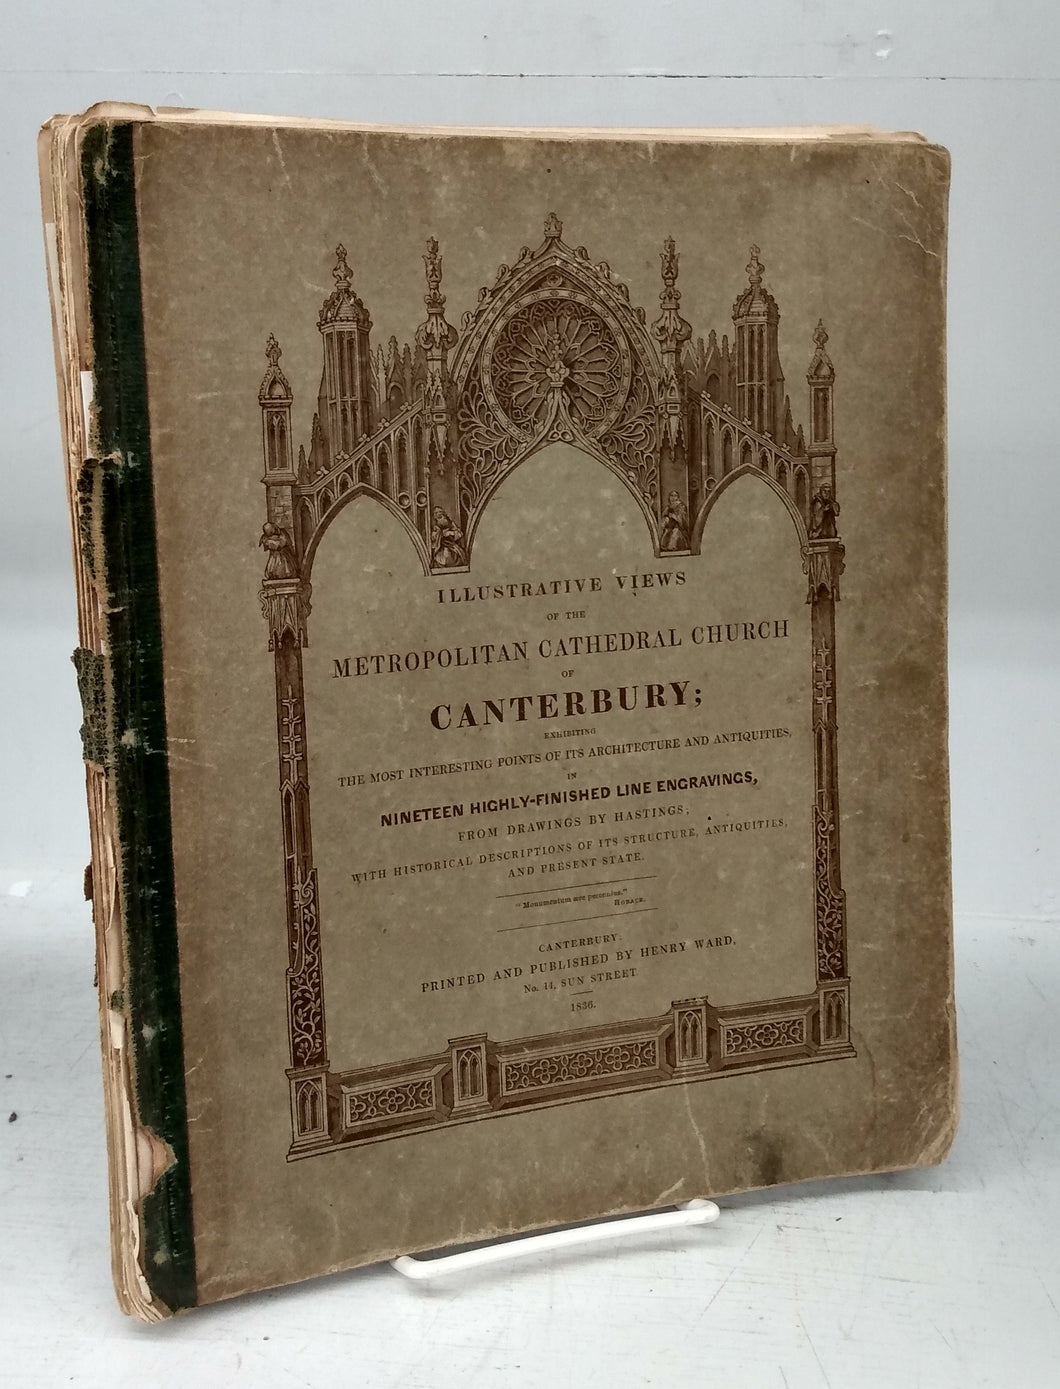 Illustrated Views of the Metropolitan Cathedral Church of Canterbury